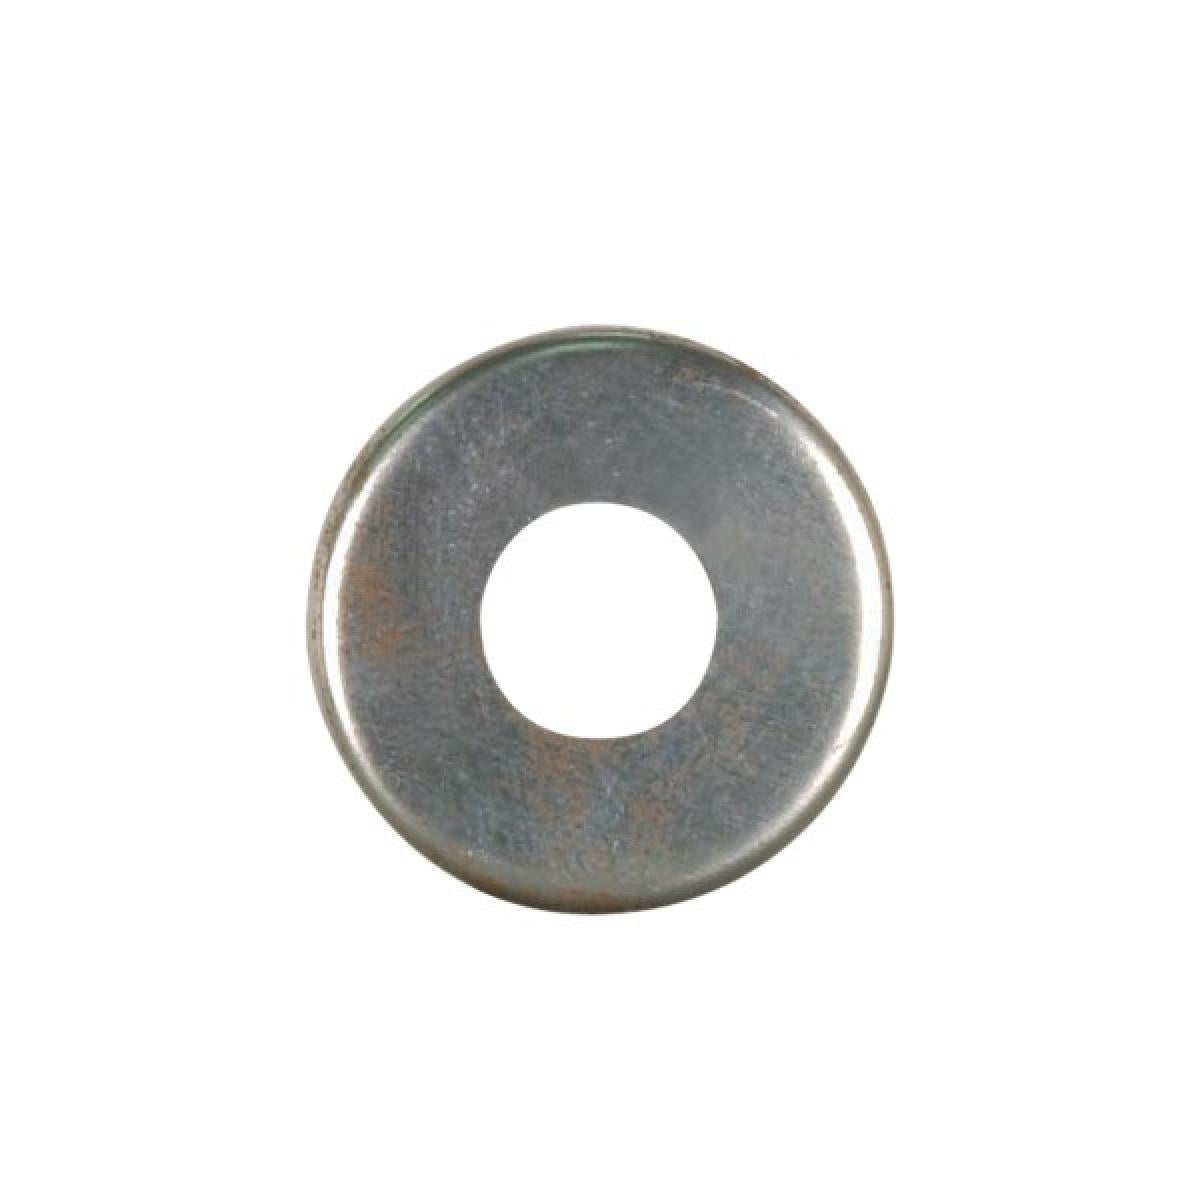 Satco 90-2053 Steel Check Ring Curled Edge 1/8 IP Slip Unfinished 3/4" Diameter